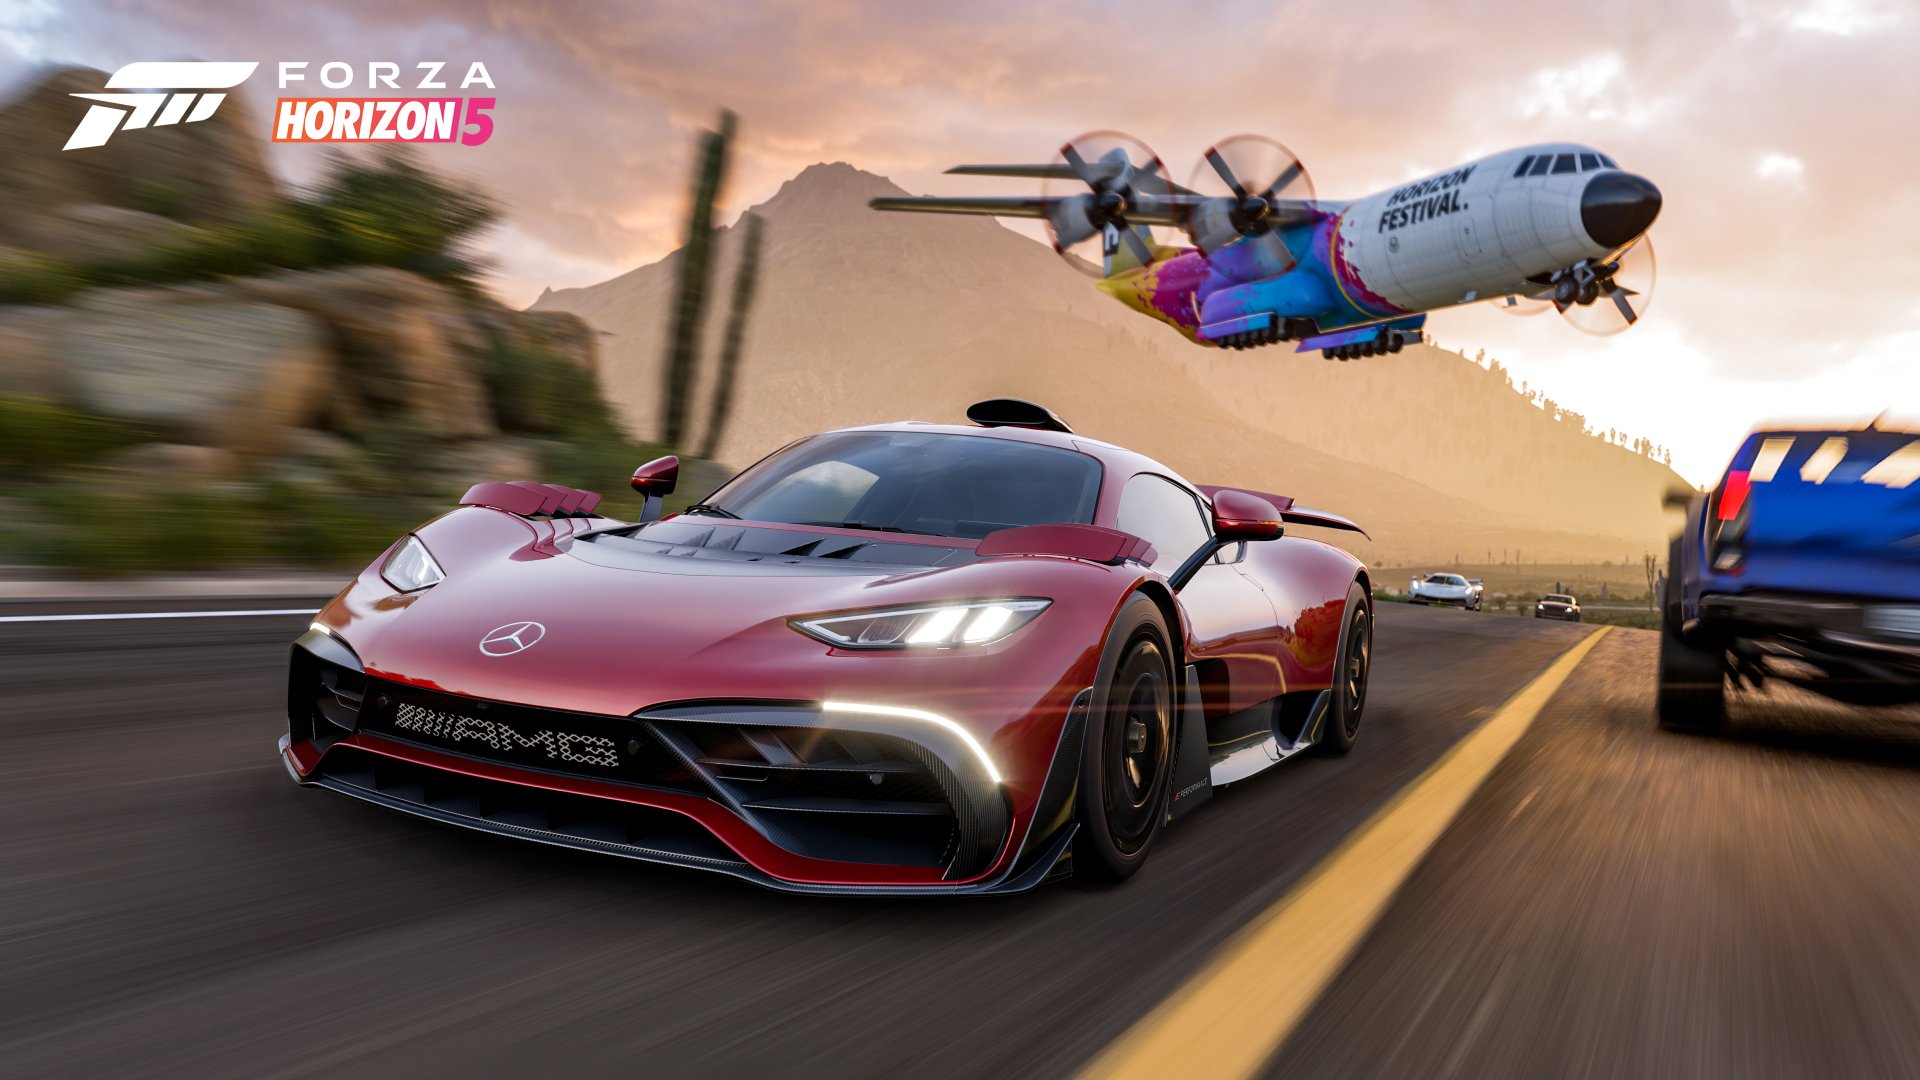 Forza Horizon 5 Download for PC